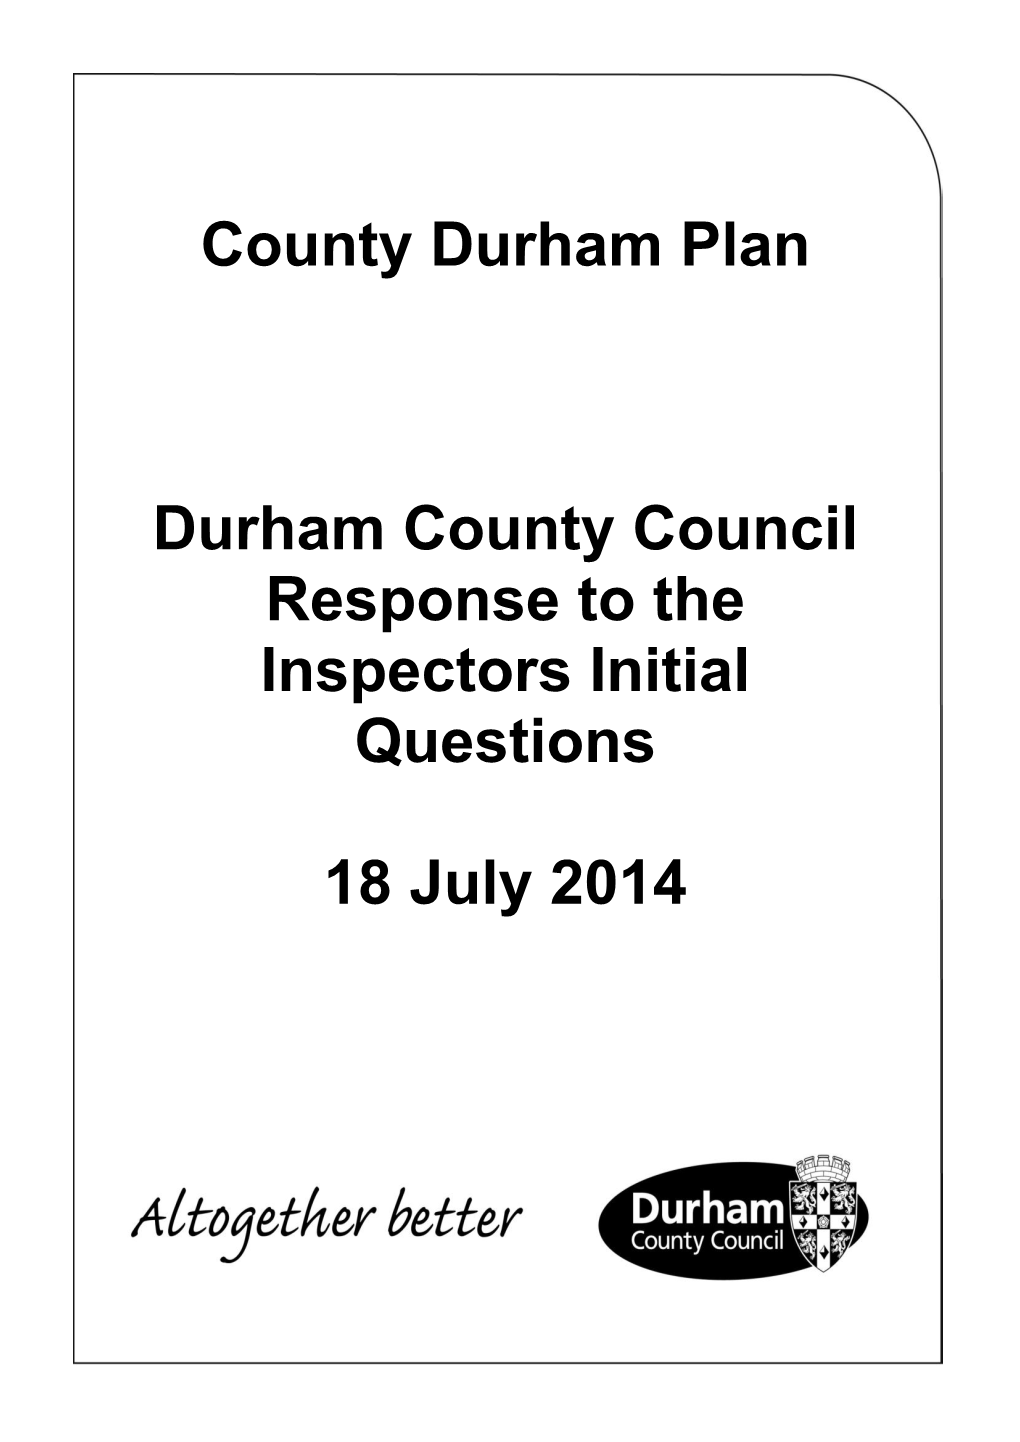 Inspector's Initial Questions 1 Submission of the County Durham Plan